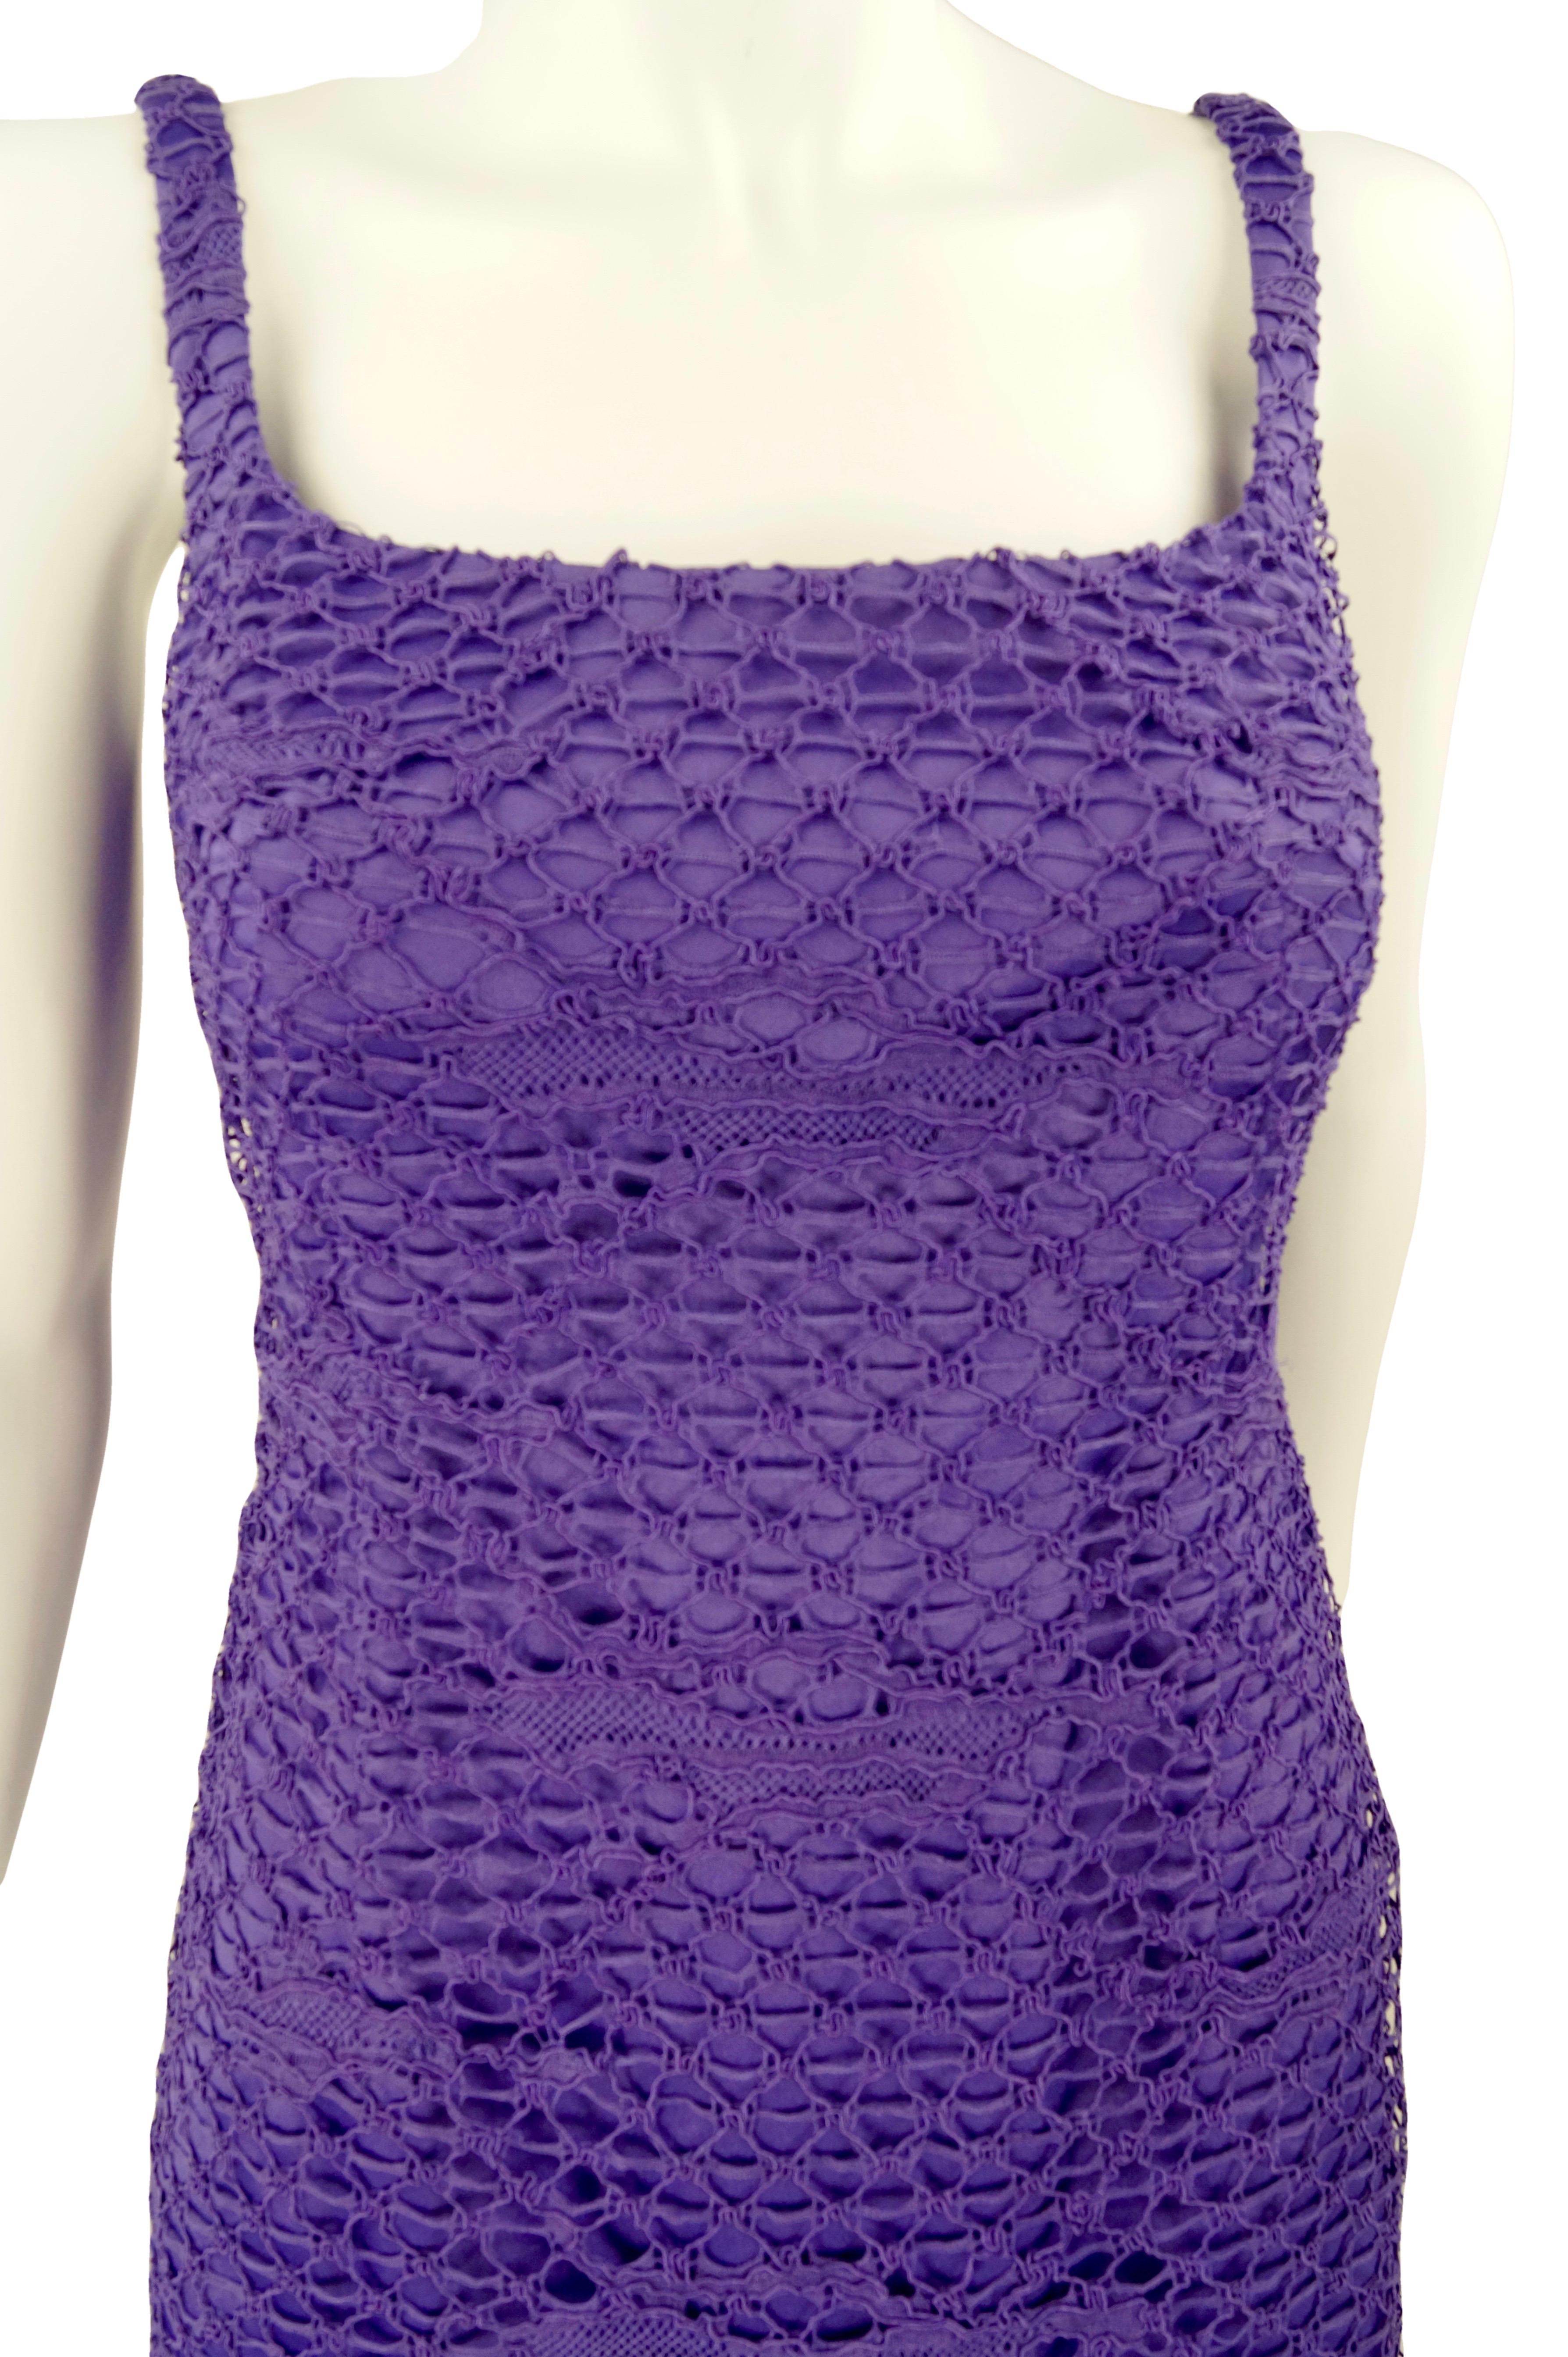 Gianni Versace Couture purple lace dress In Excellent Condition For Sale In Rubiera, RE